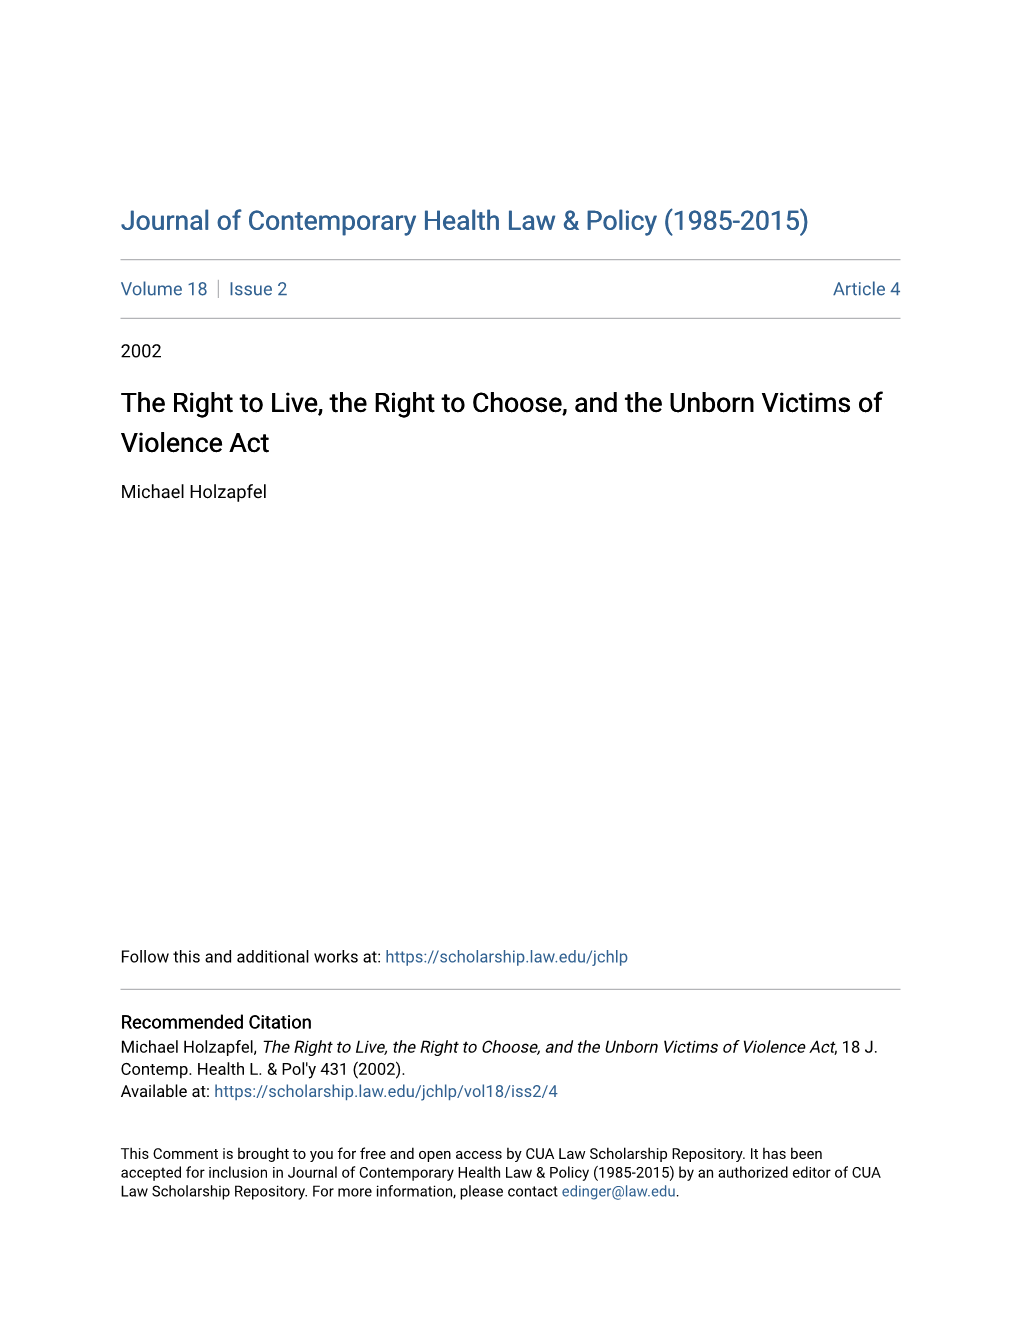 The Right to Live, the Right to Choose, and the Unborn Victims of Violence Act